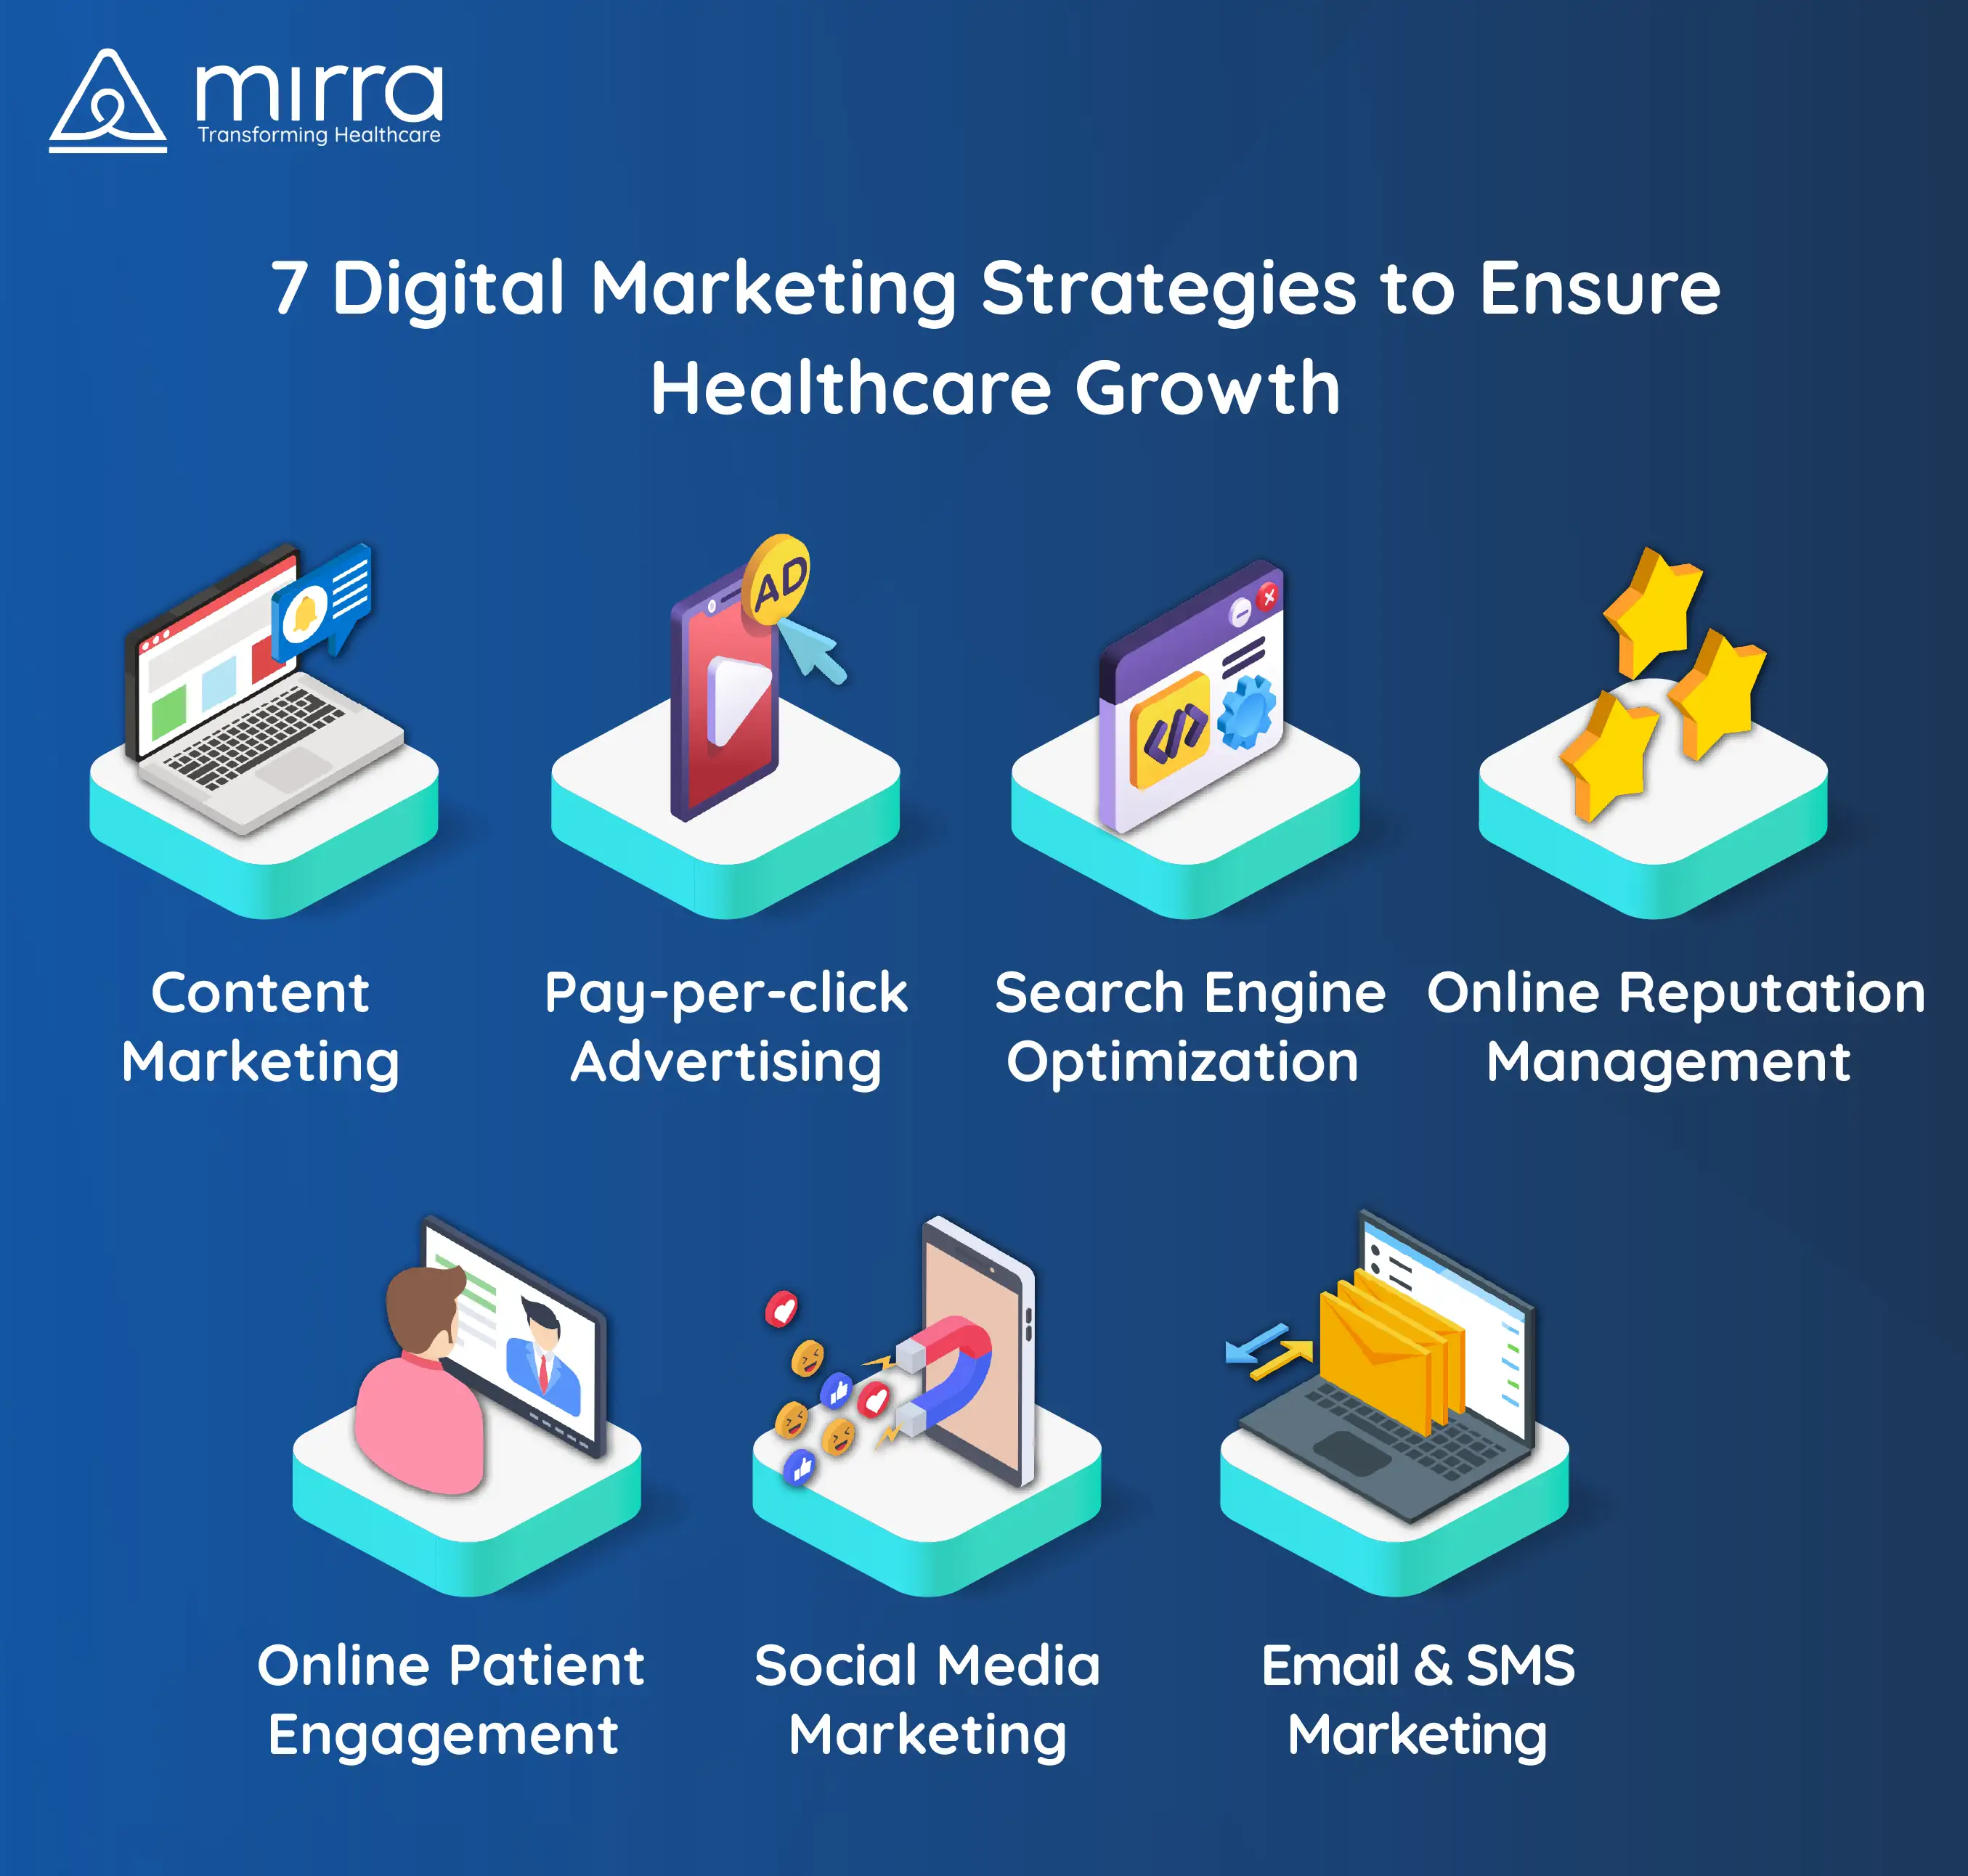 Proven Digital Marketing Strategies for Healthcare Growth